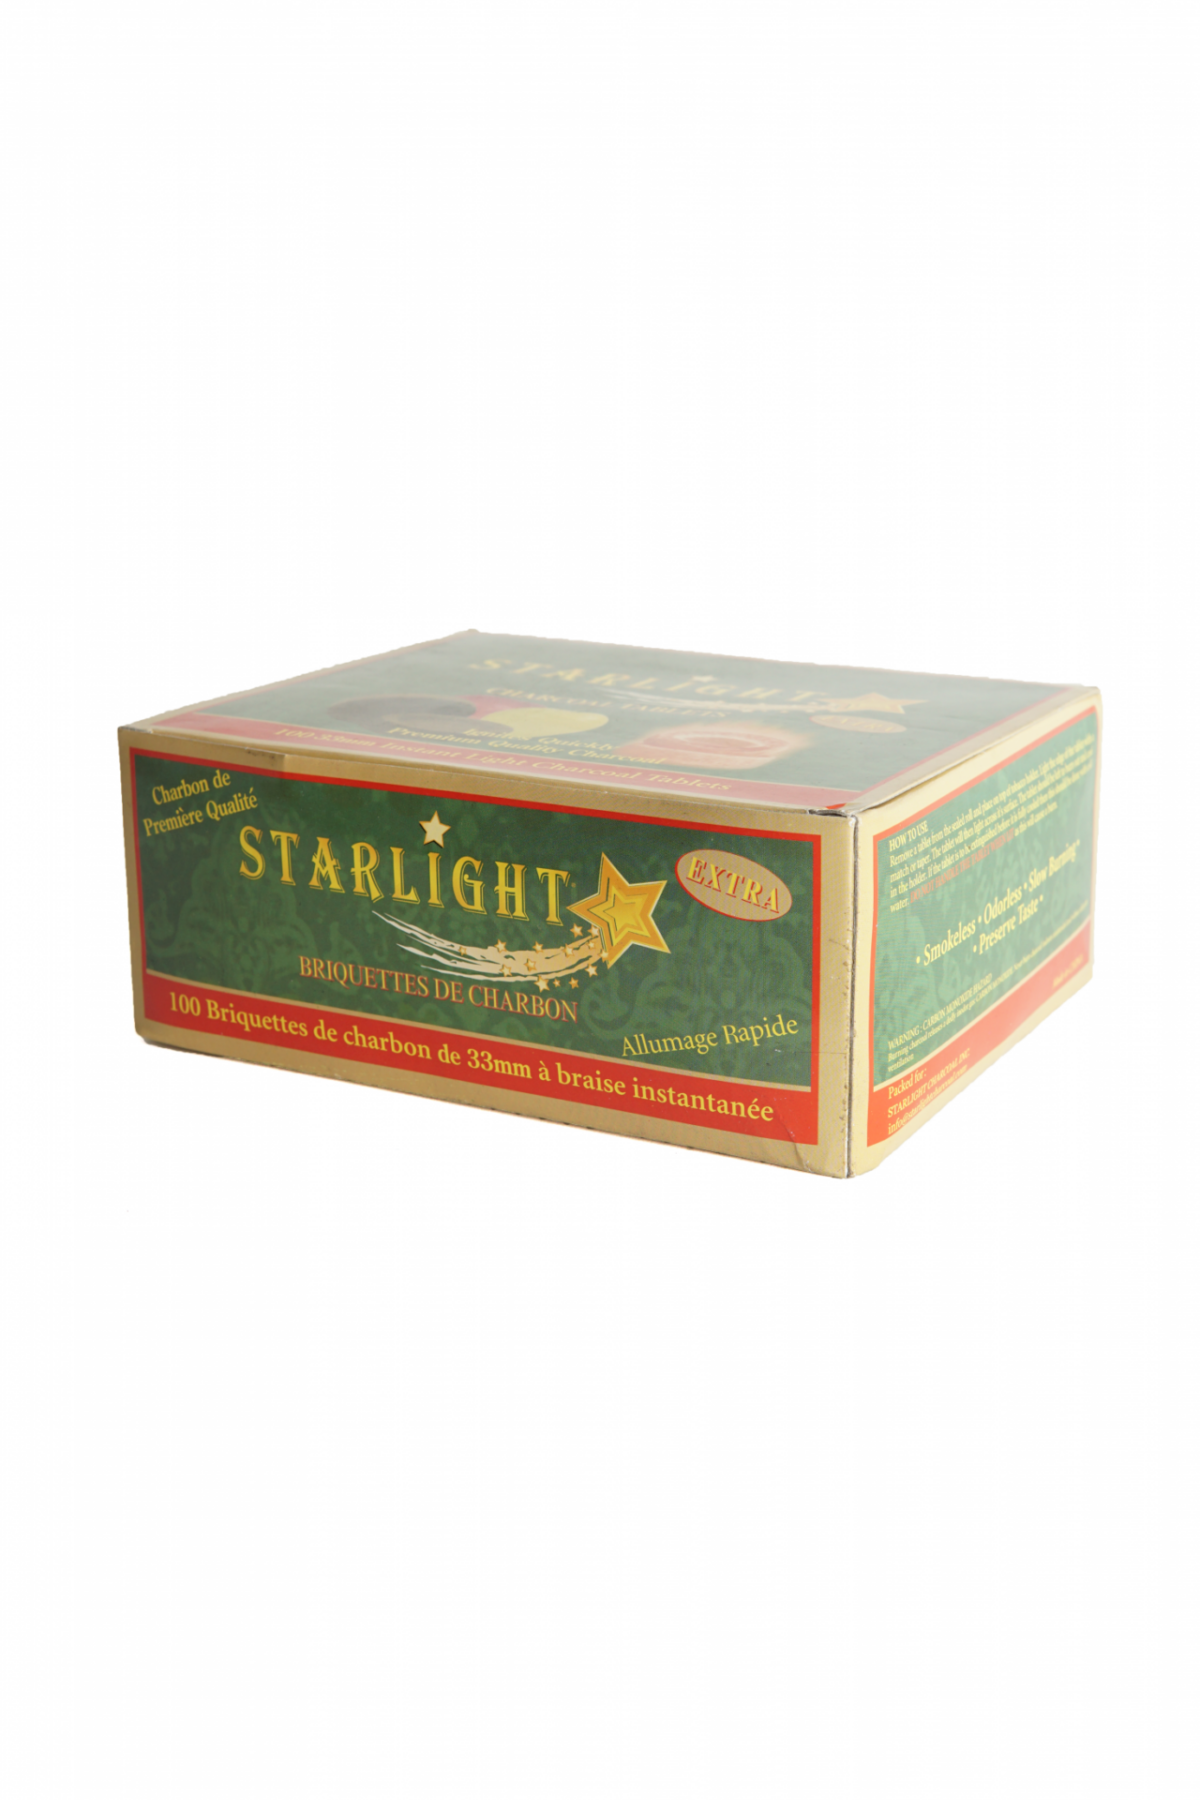 Starlight Instant Charcoal Tablets Green - 100 Pack